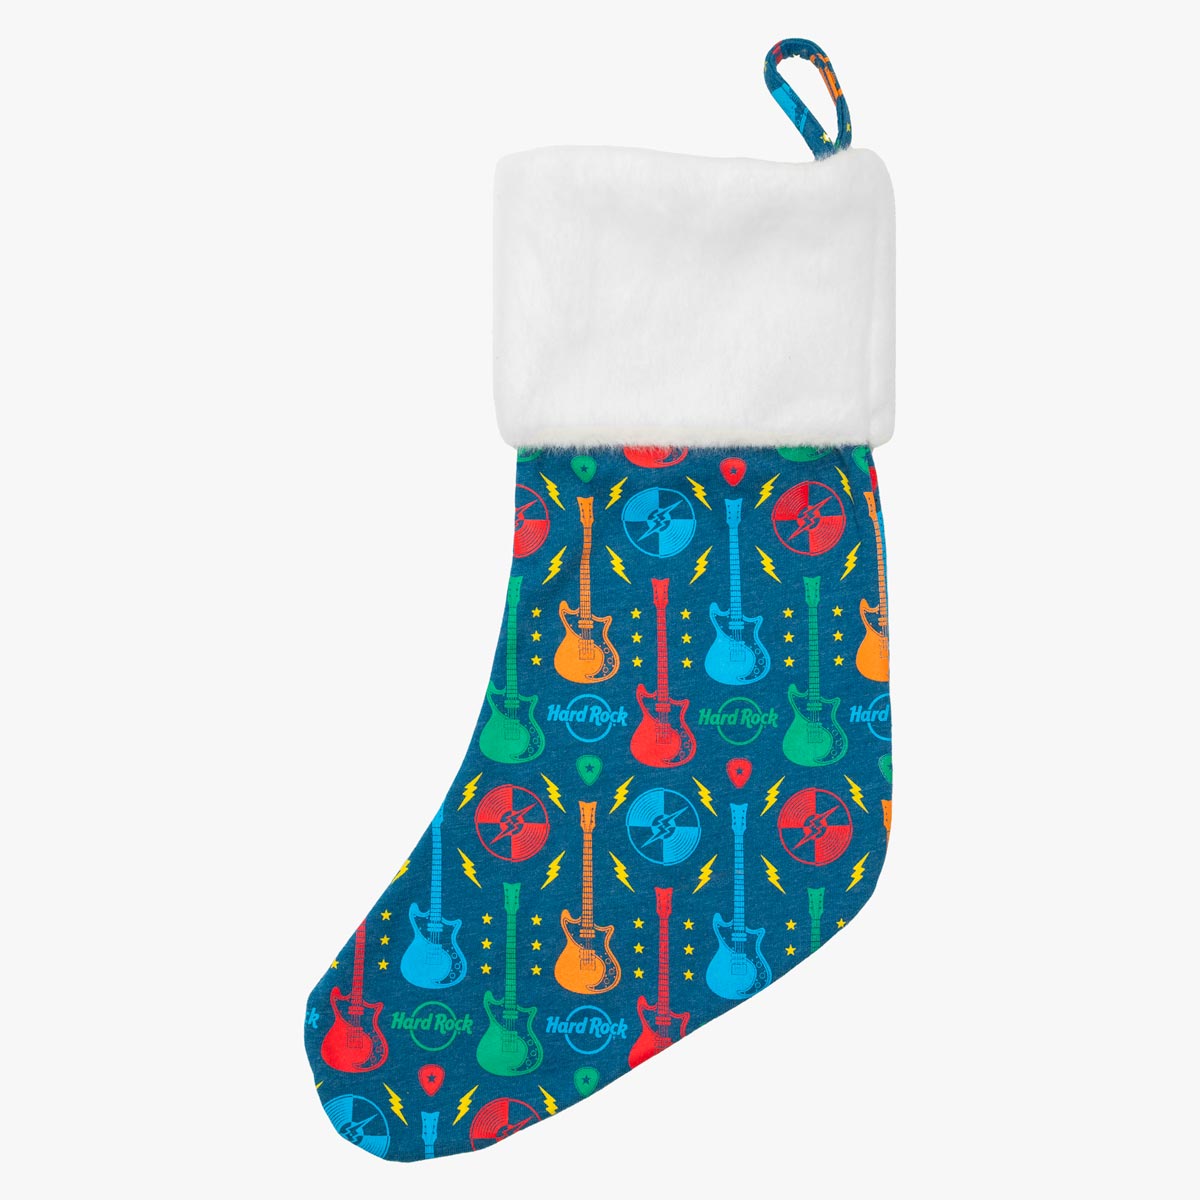 Hard Rock Cozy Holiday Stocking in Blue Guitar Print image number 2